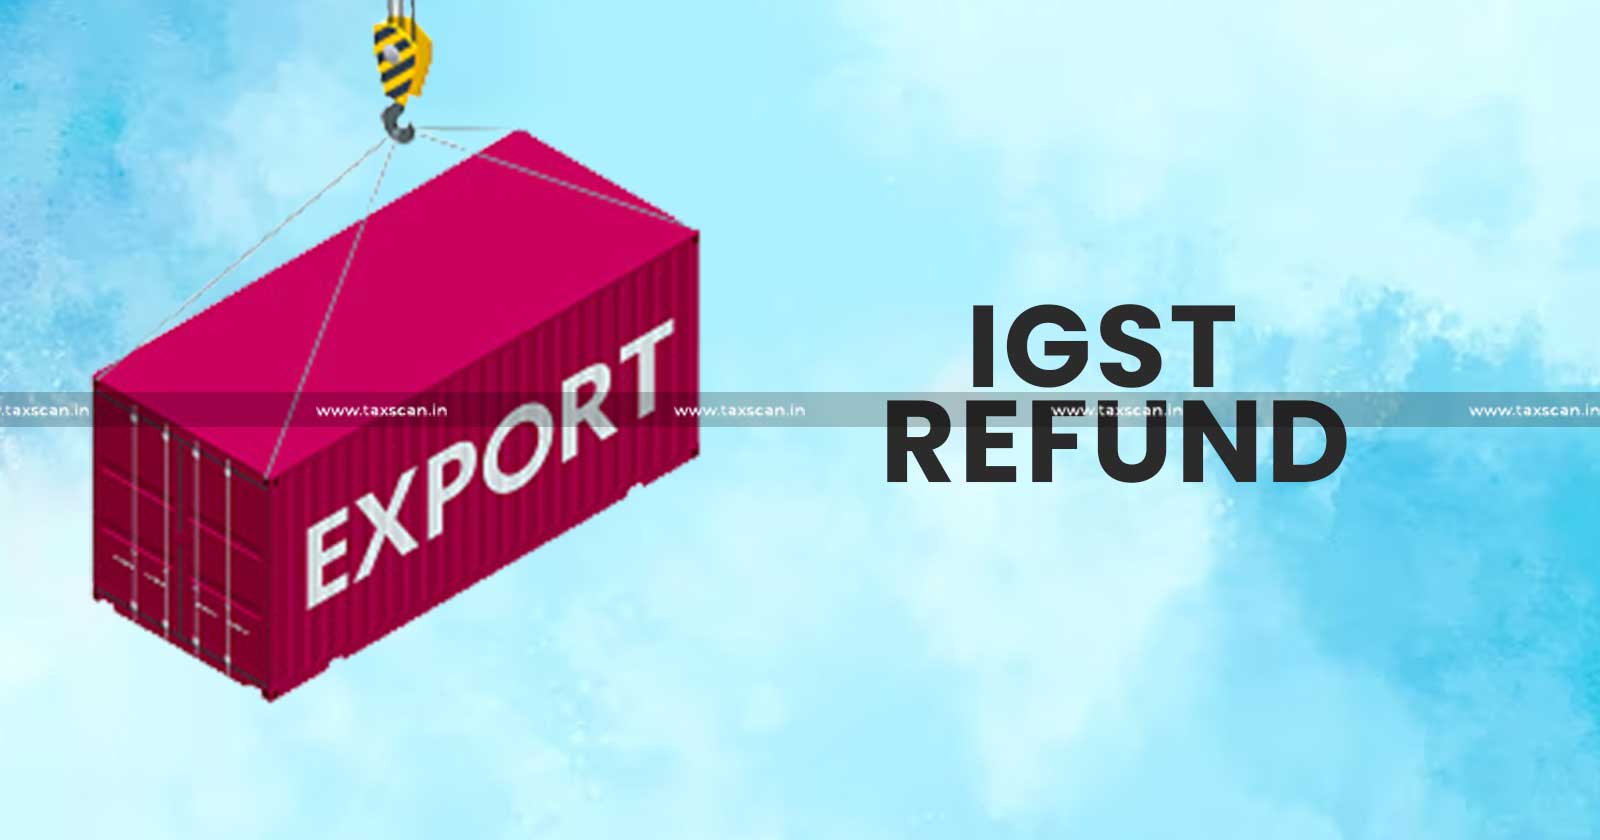 Refund - IGST - Exported Items - directs - Refund Claim - Kerala High Court - taxscan